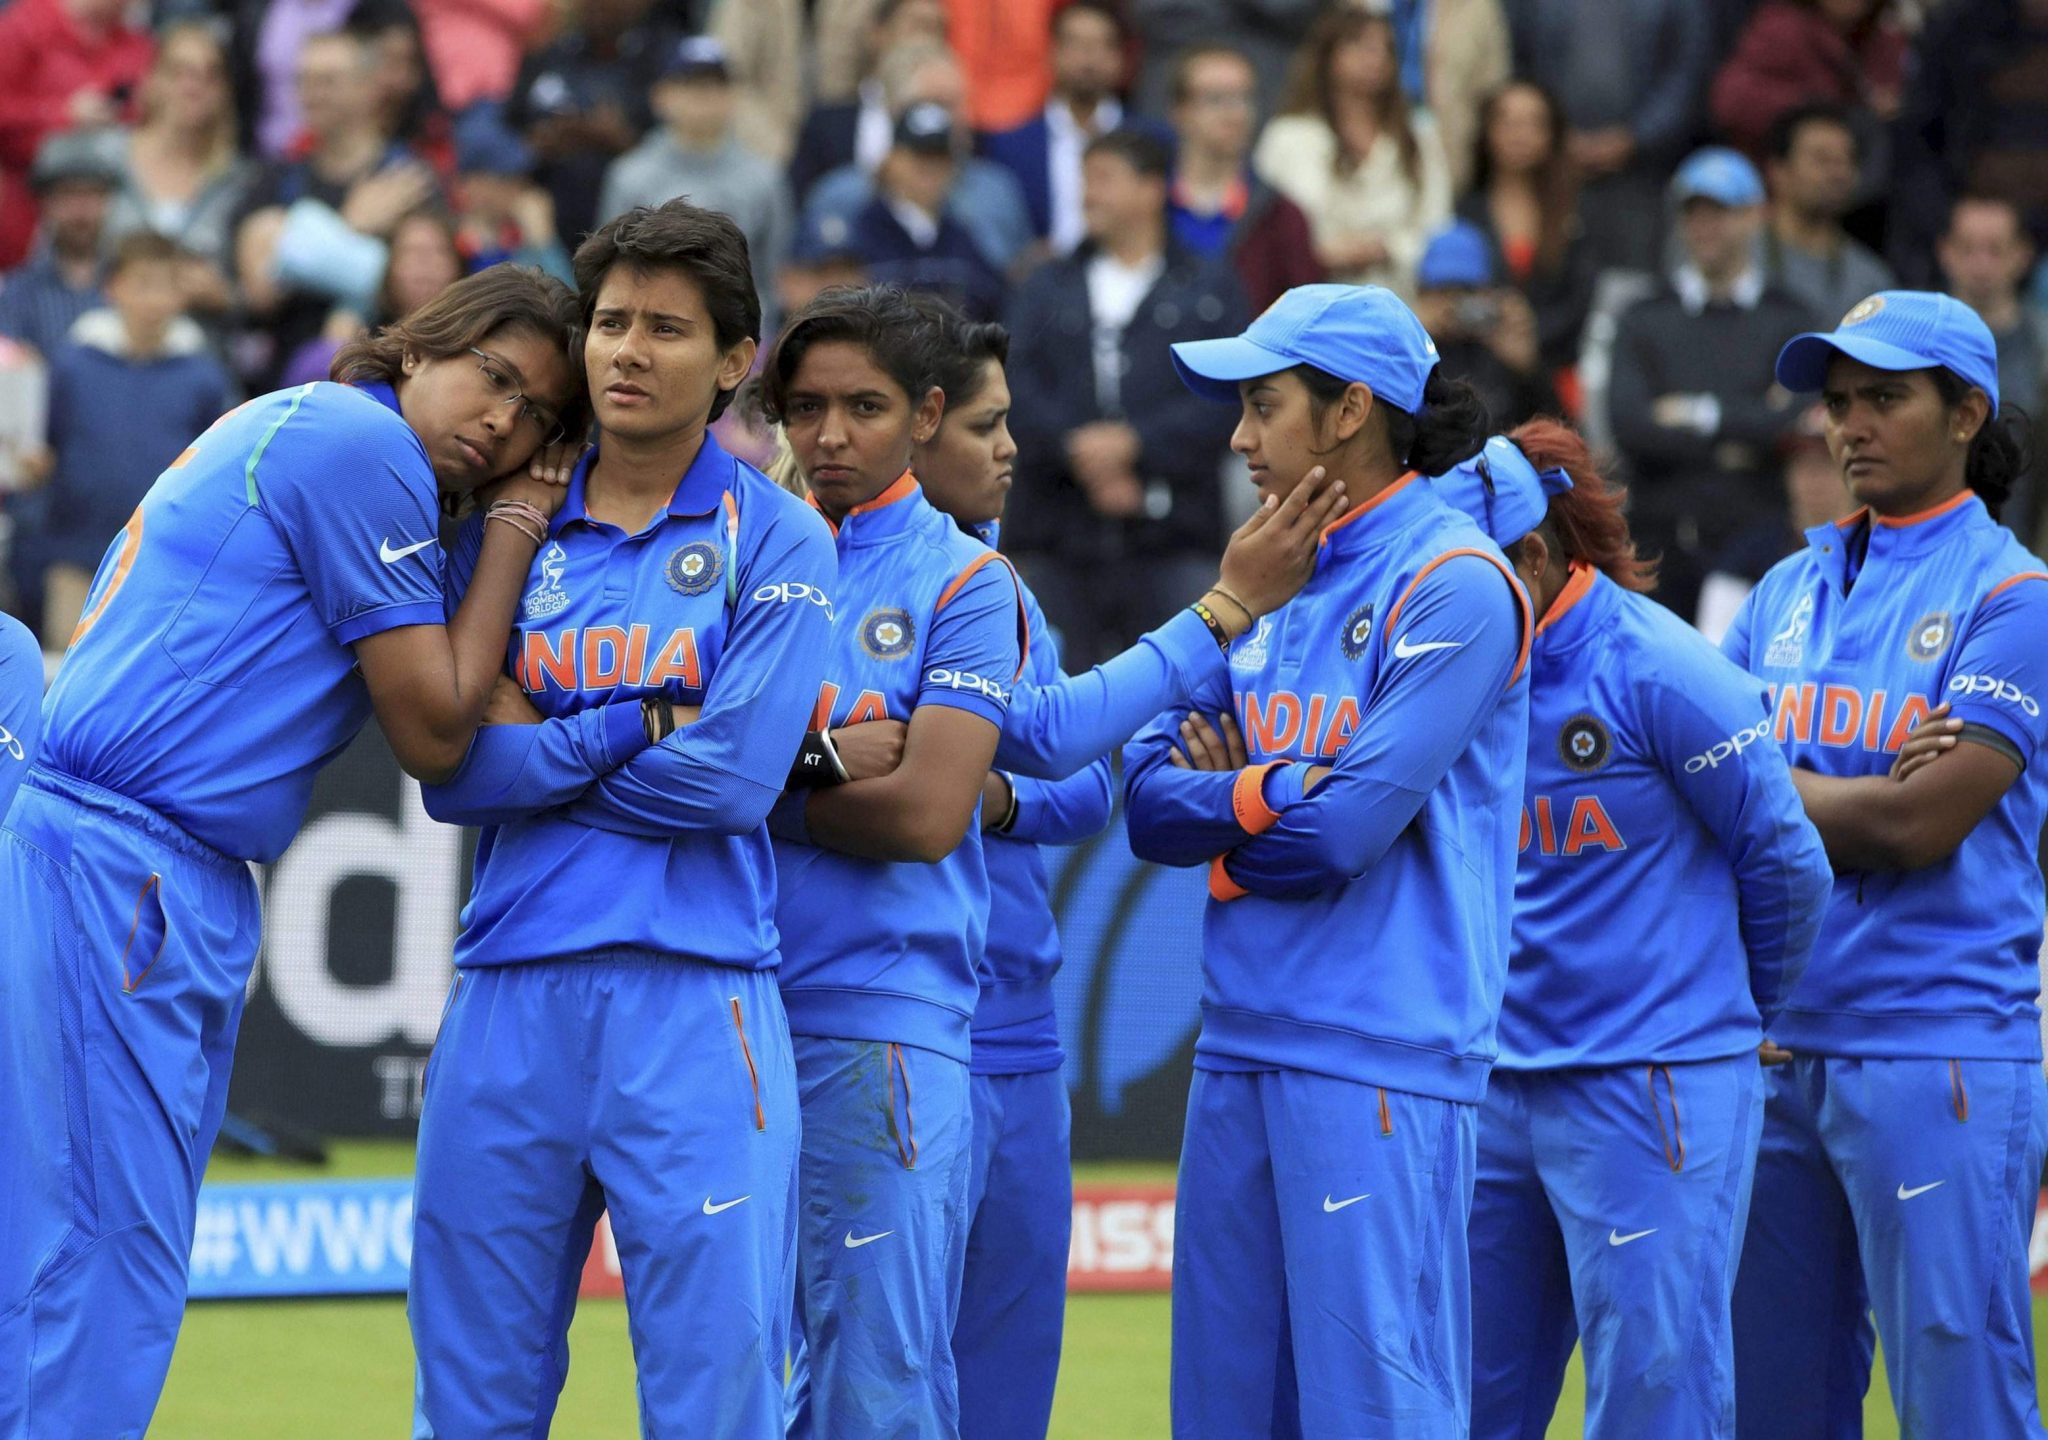 ICC Women's World Cup: I'm proud of my girls, says Mithali Raj after heartbreaking loss